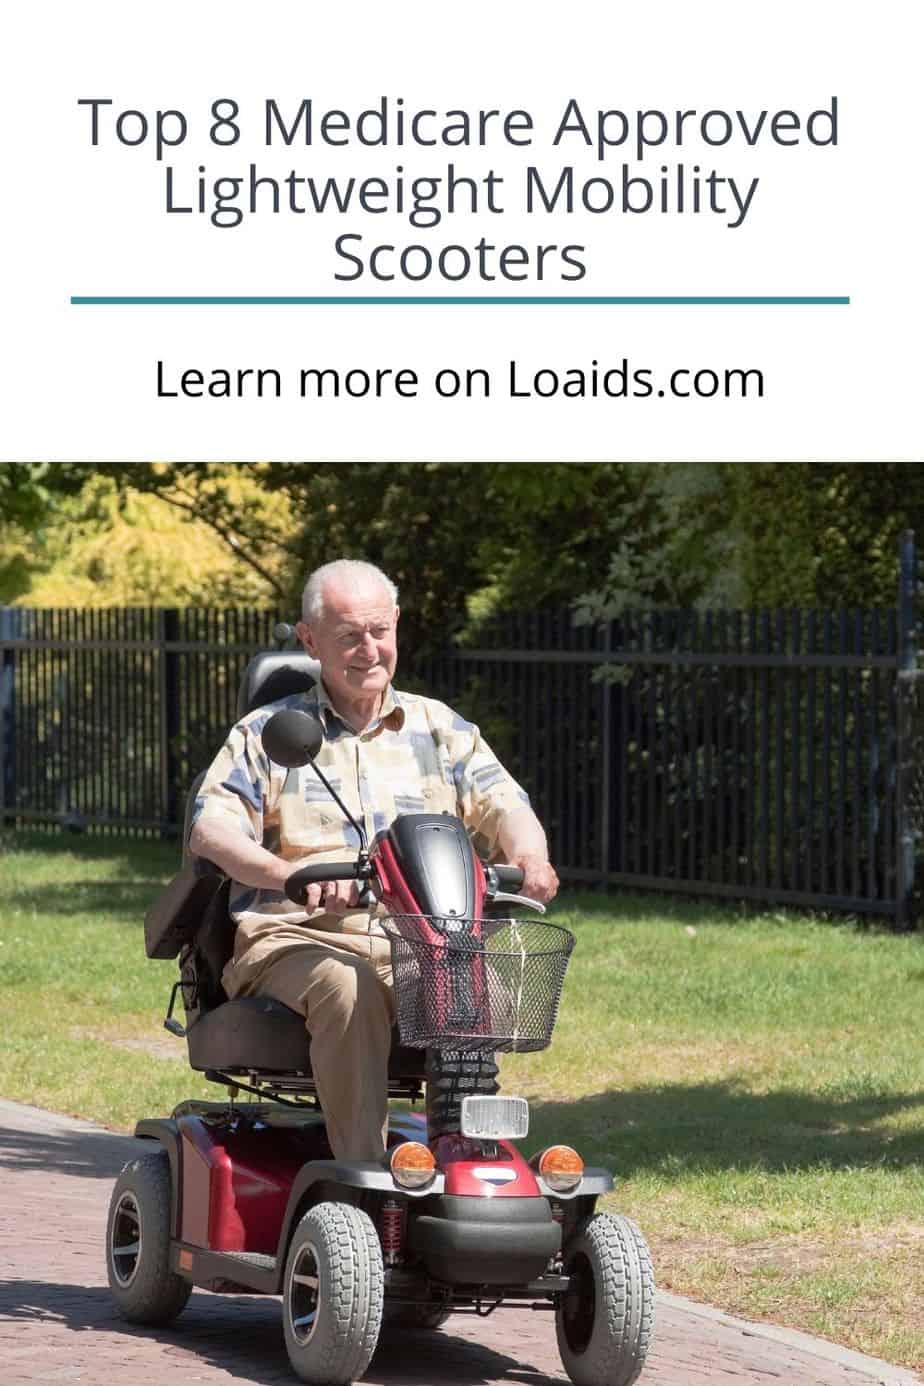 senior man riding on the lightest mobility scooter